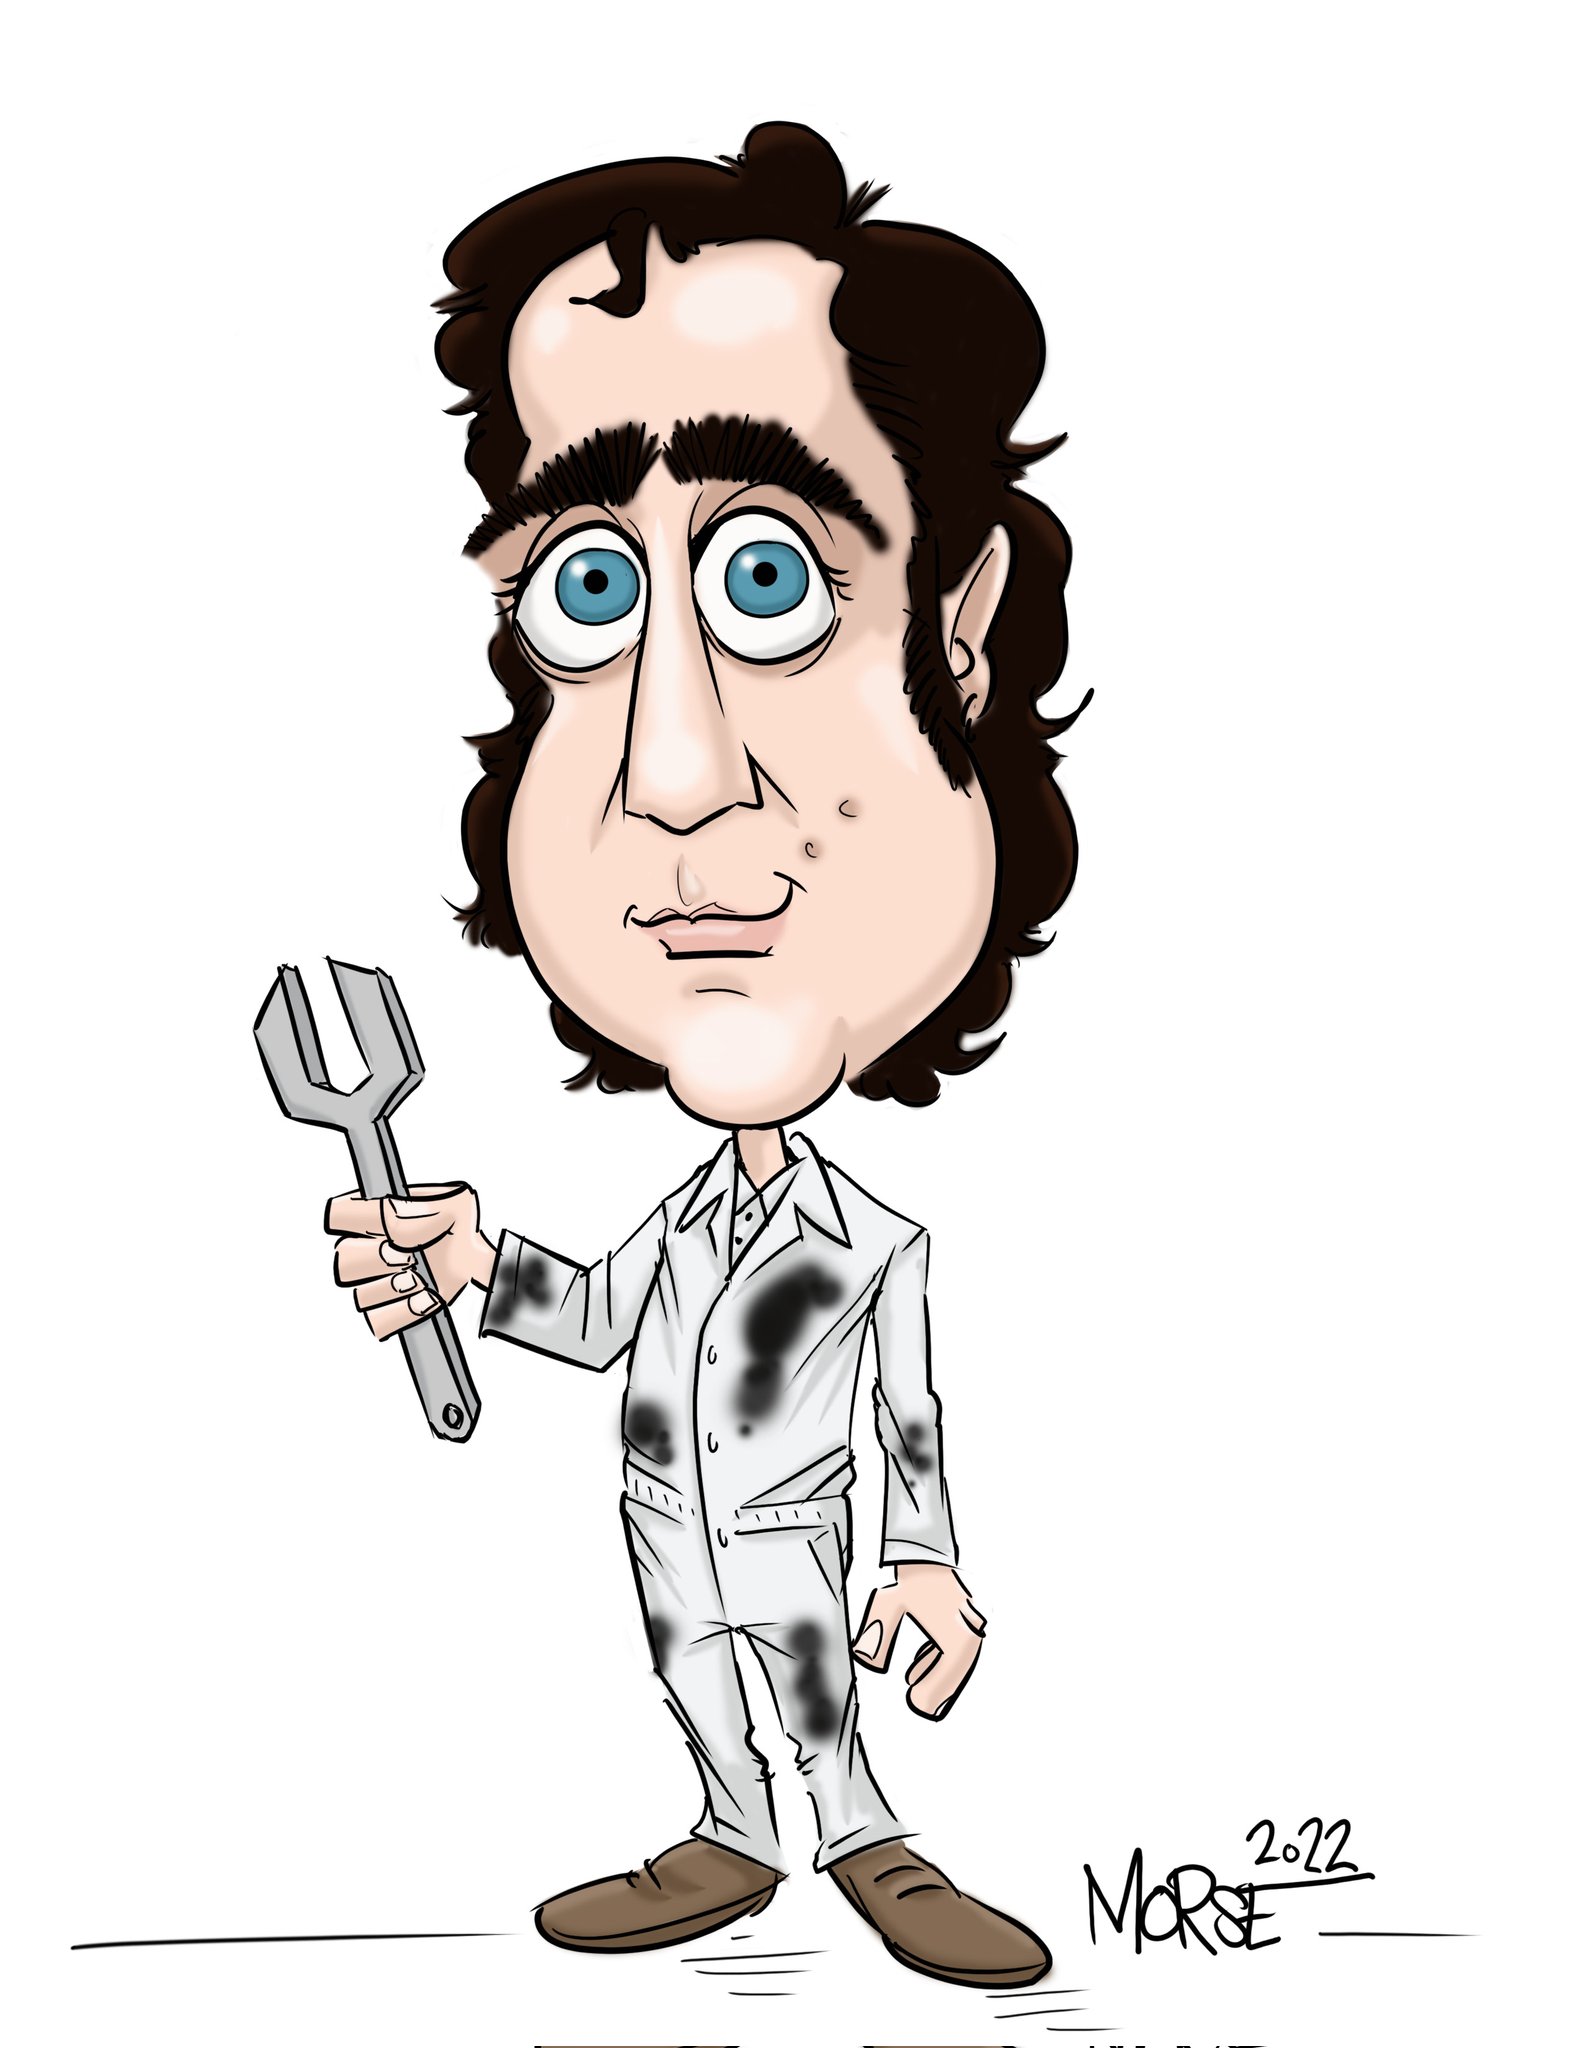 Happy Birthday to Andy Kaufman! Want a caricature? Message me! Tenk you veddy much  